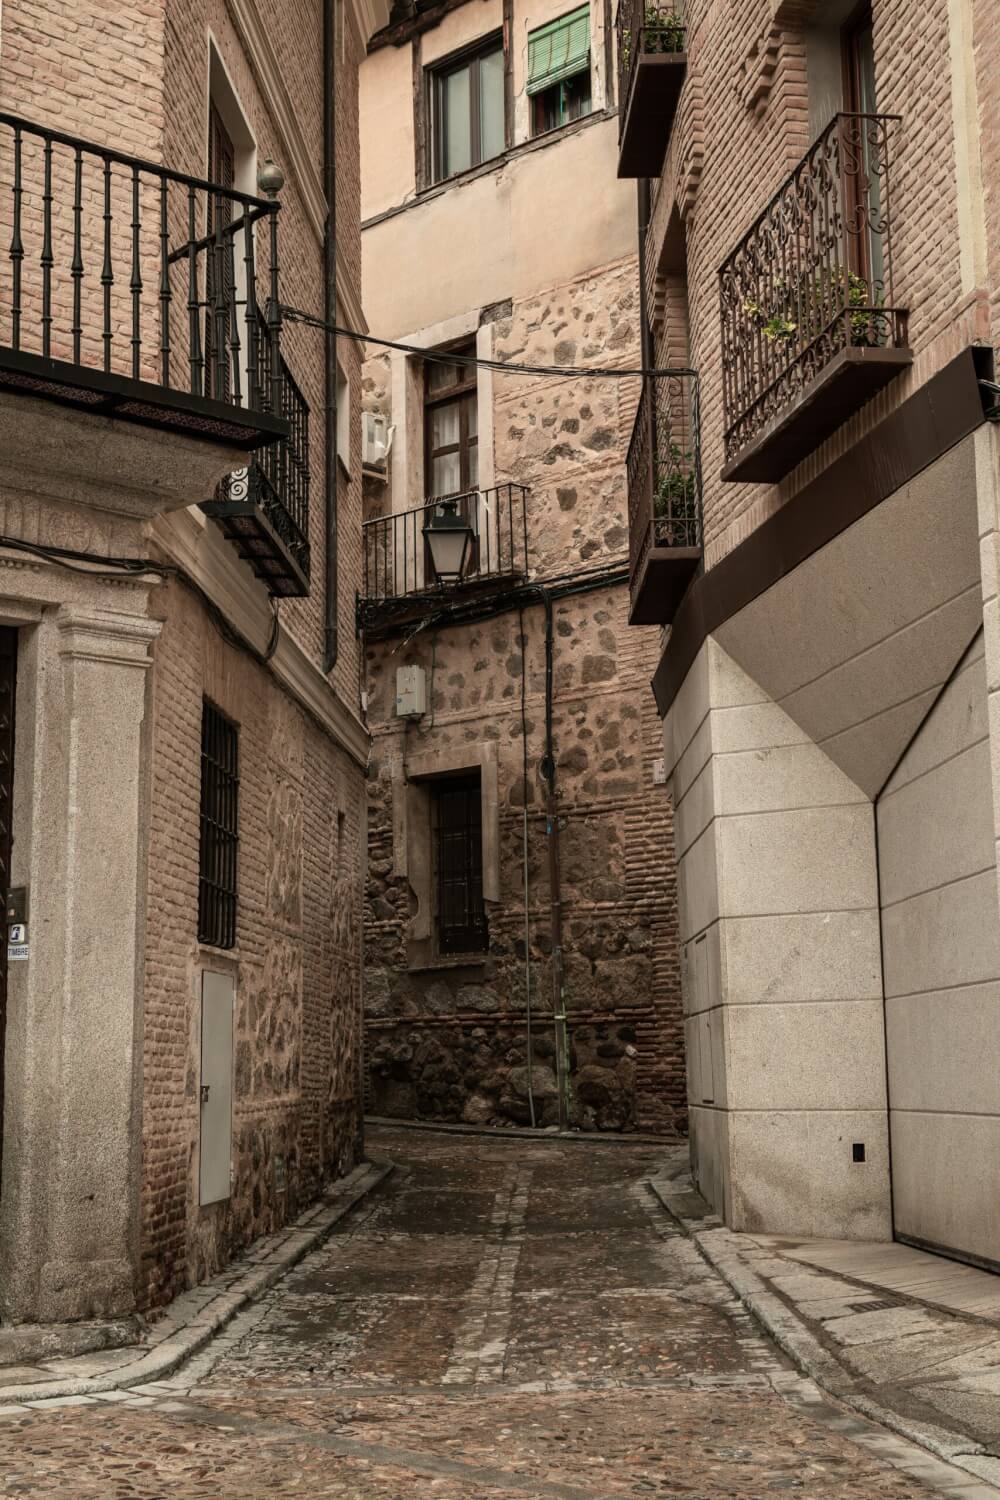 Narrow street in Toledo. The buildings that line the street are all made of stone, and have small balconies on the first story.